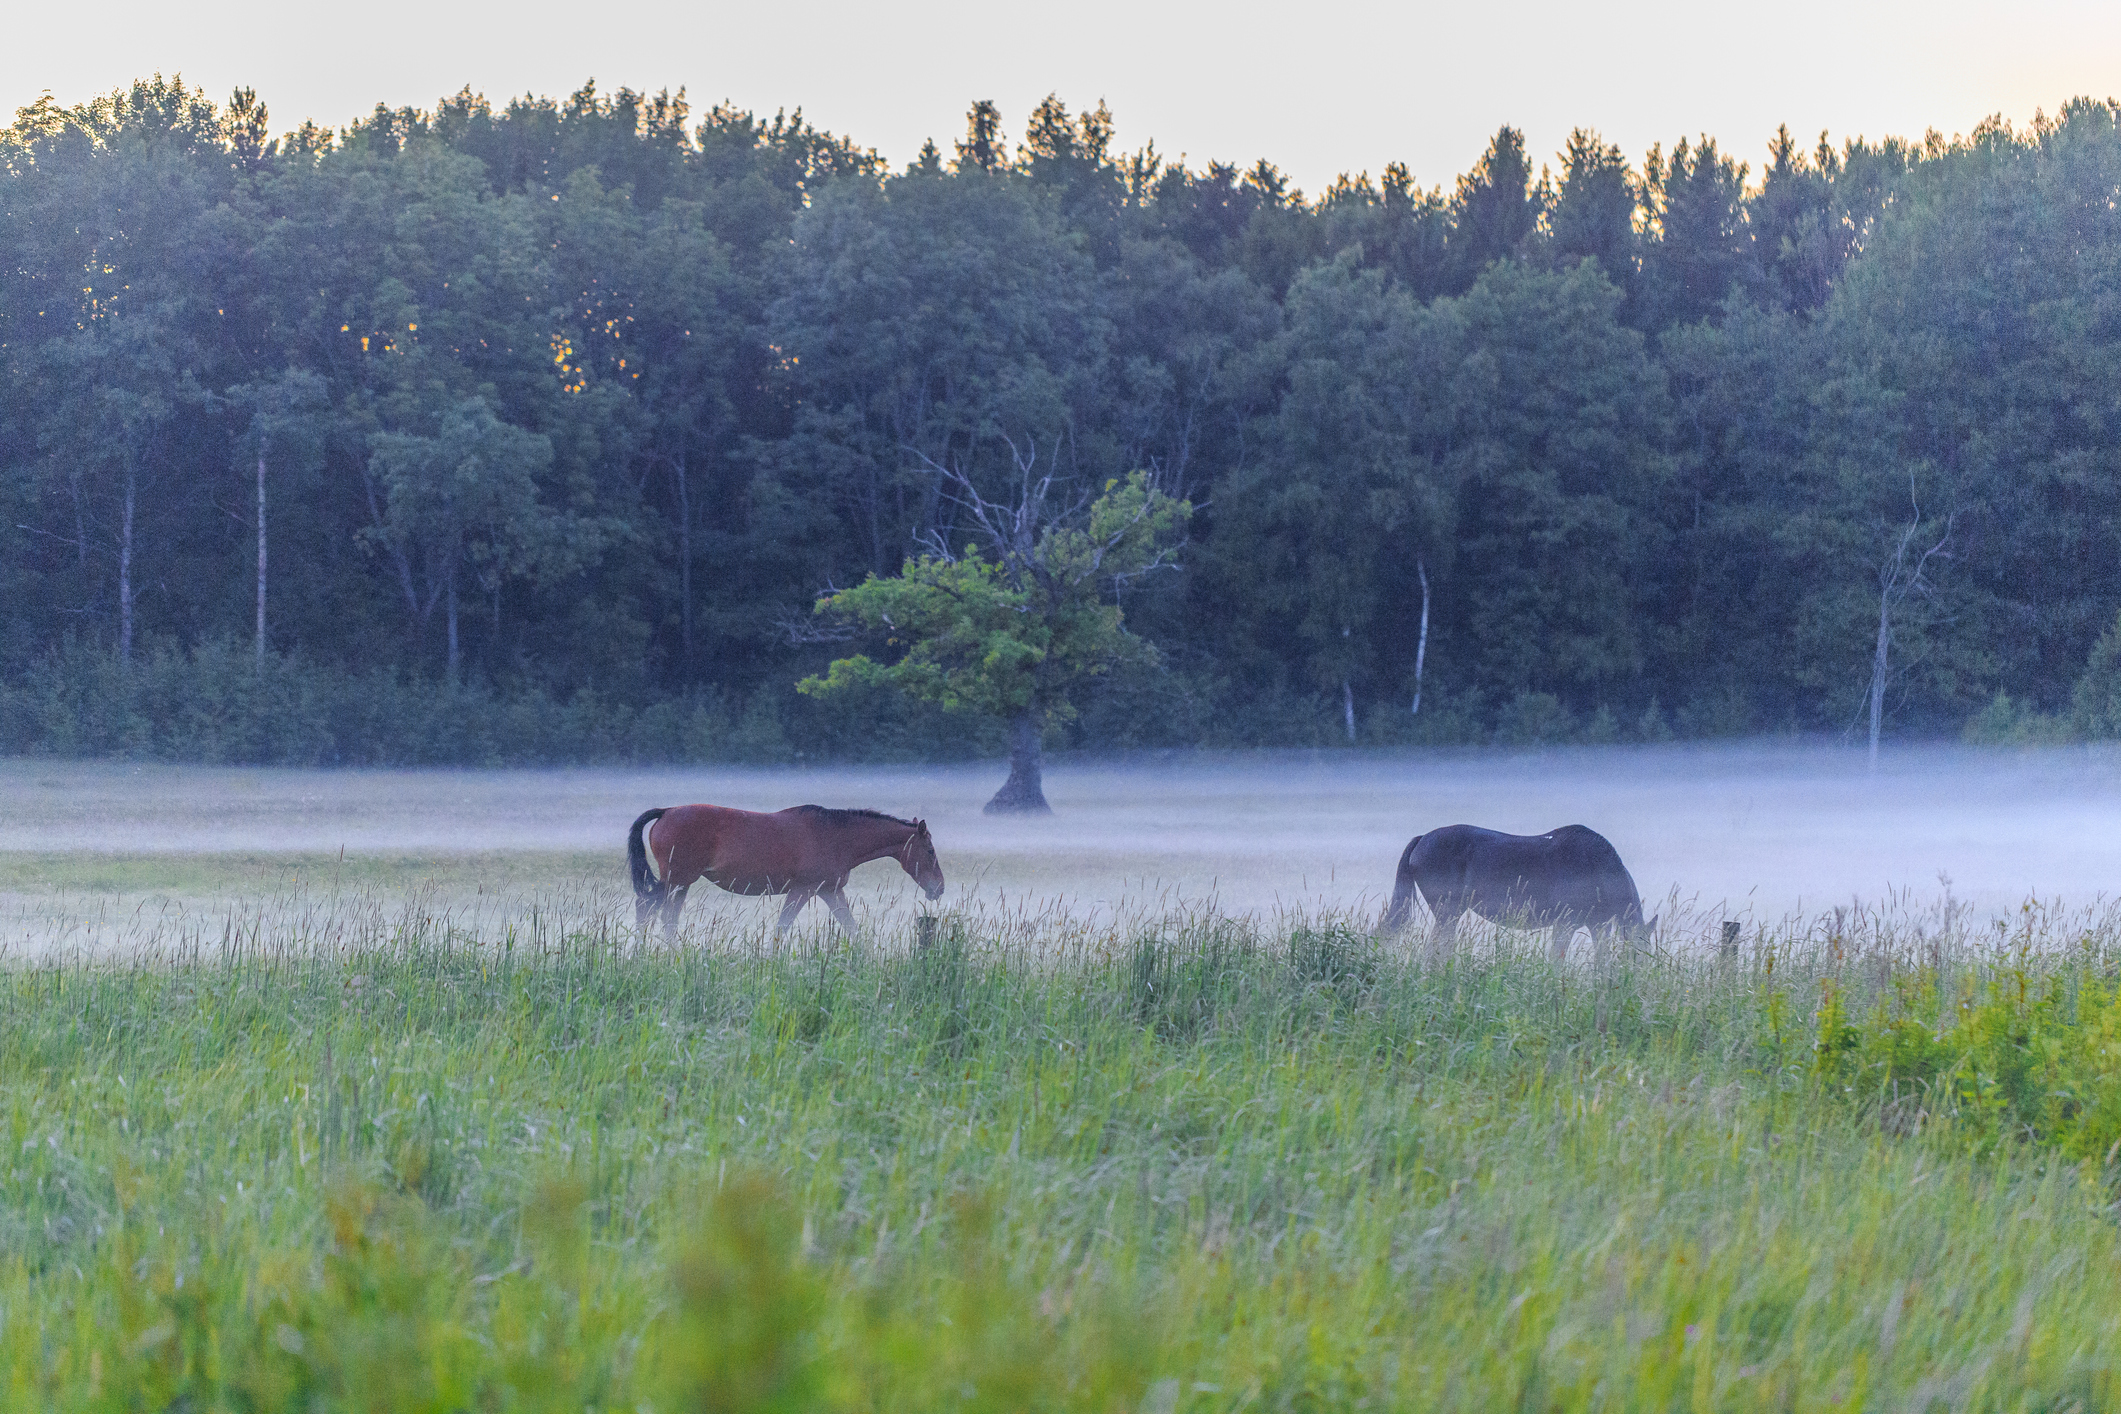 A pair of horses on a meadow shrouded in fog.